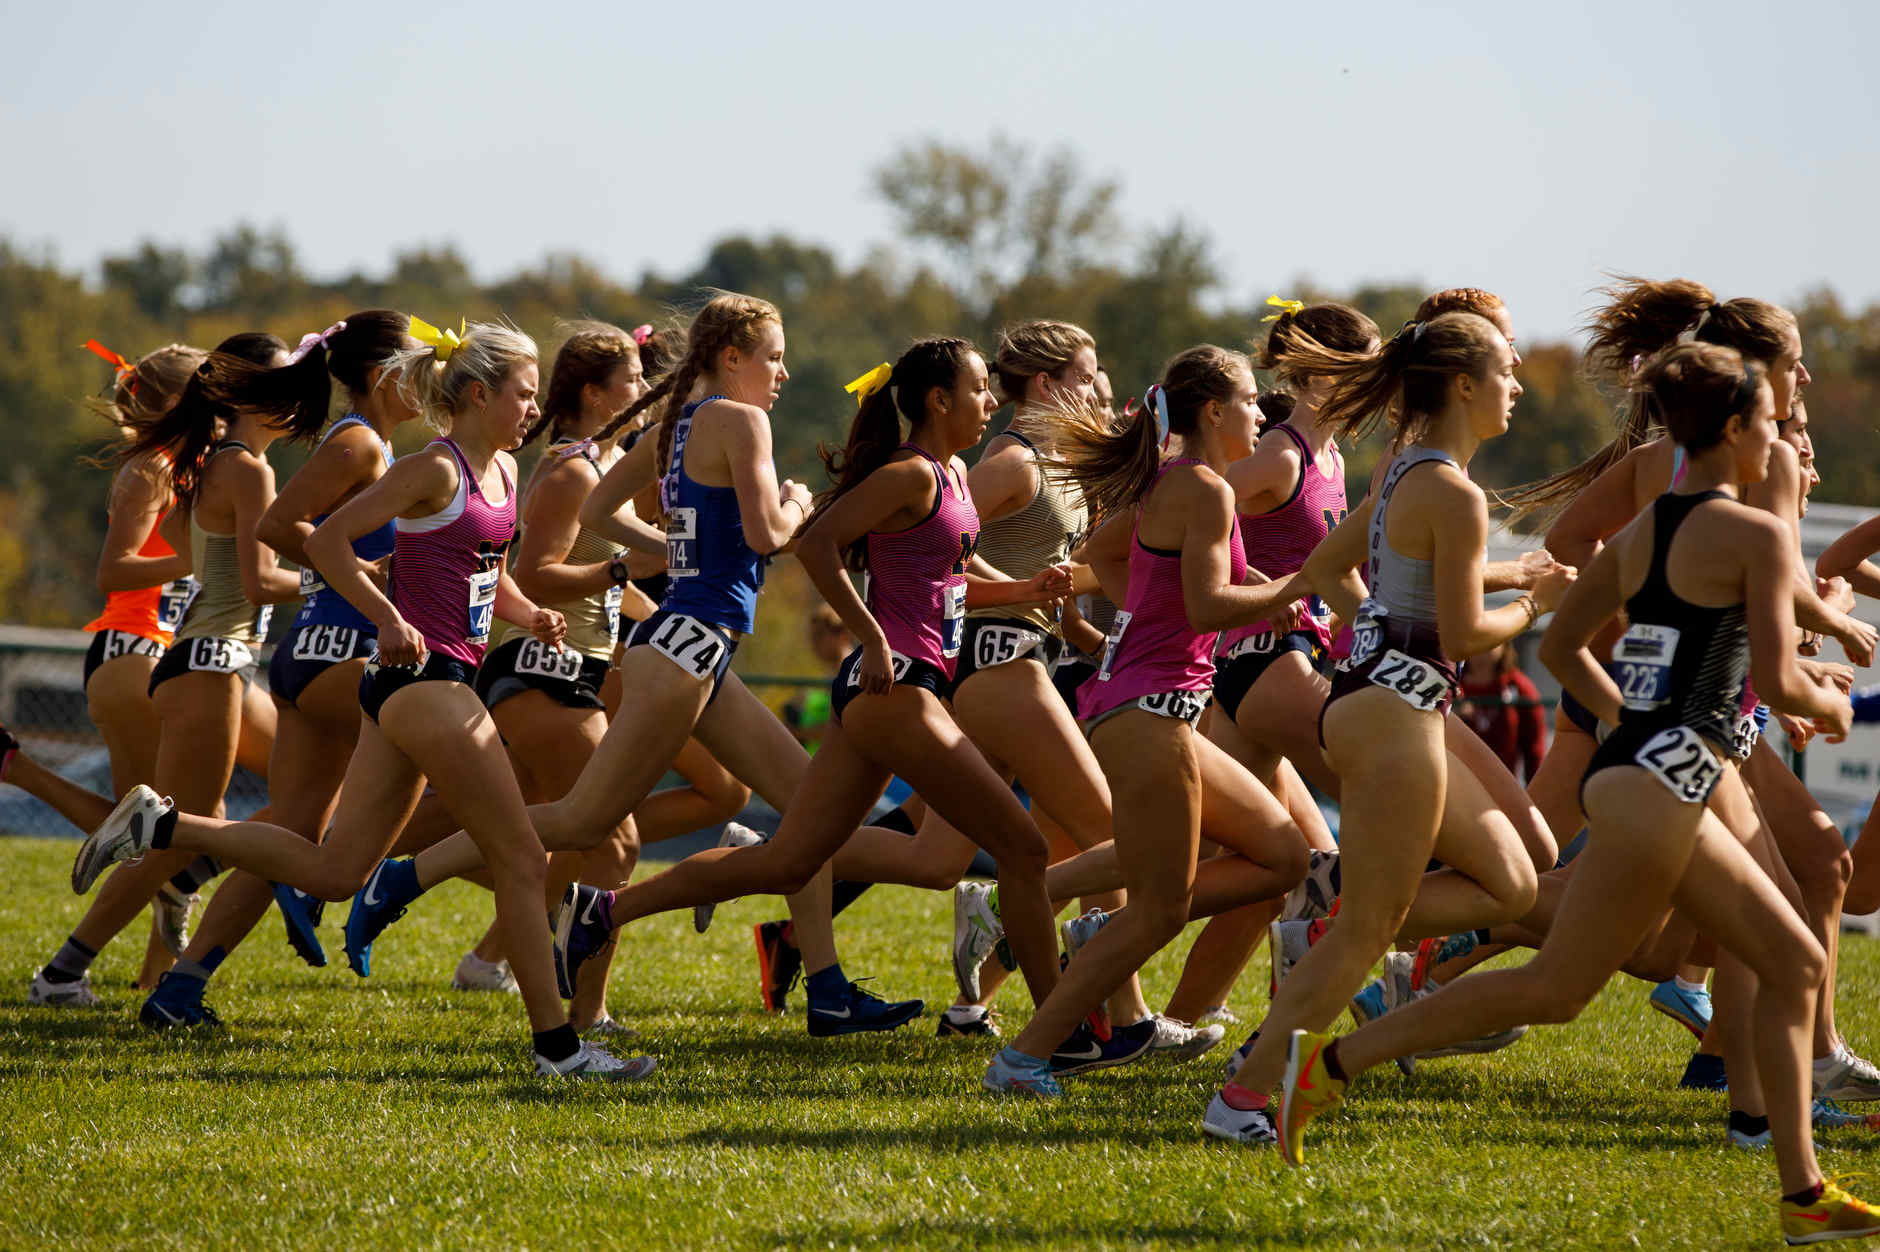 Michigan runners compete during the Indiana State Pre-National Cross Country Invitational in Terre Haute, Indiana on Saturday, Oct. 19, 2019. (Photo by James Brosher)